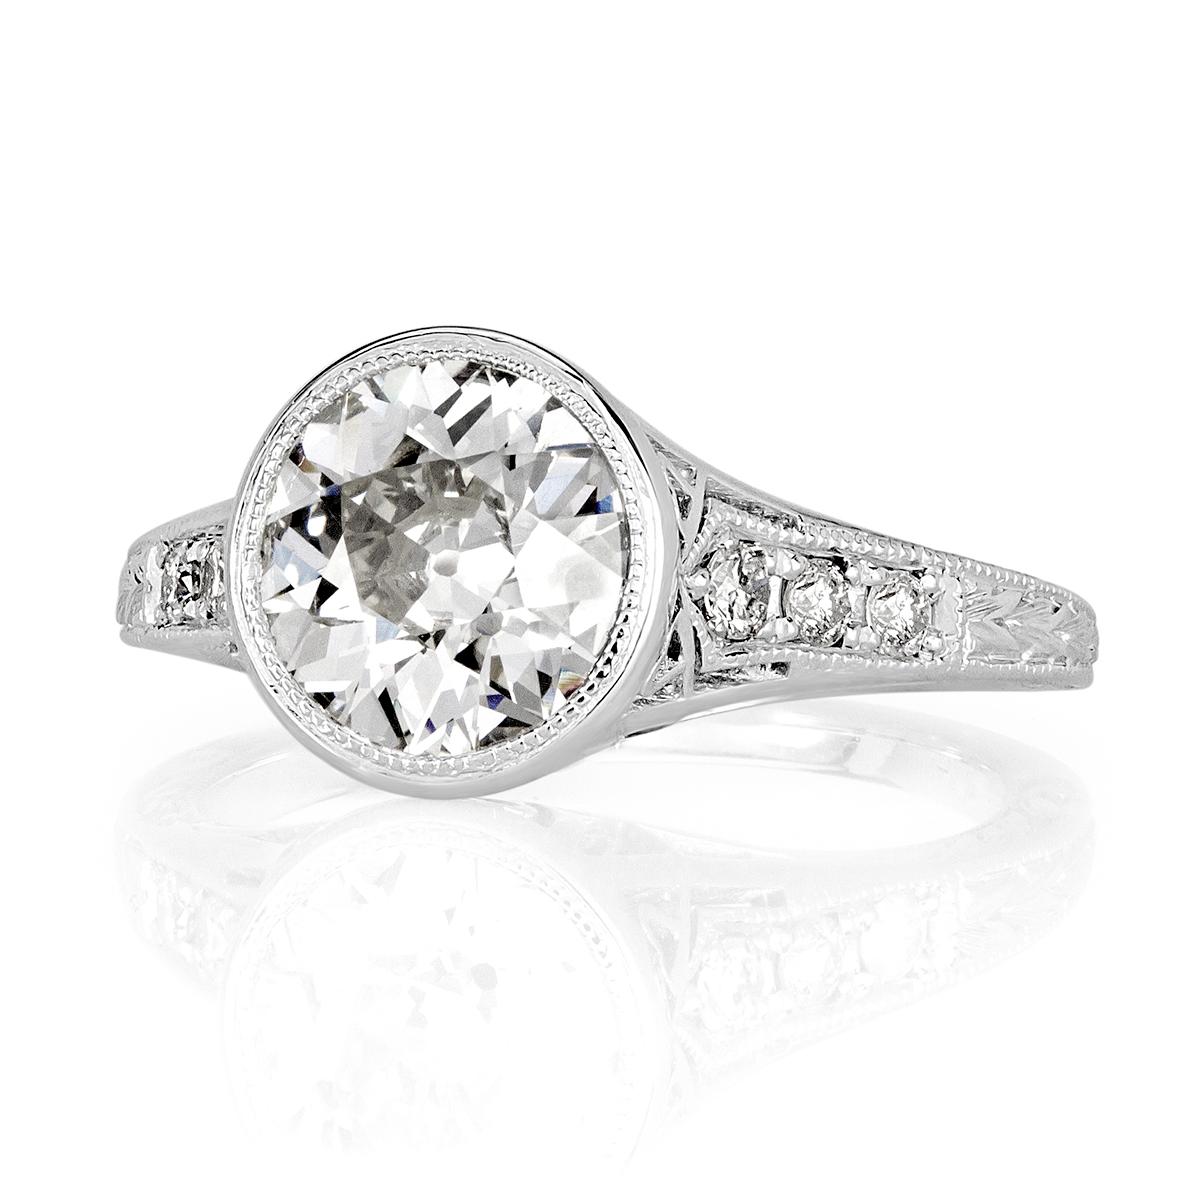 This gorgeous estate diamond  ring showcases a very rare old European cut center diamond, GIA certified at L-VS2. It is bezel set in a unique center basket accented with hand milgrain detail and embellished with heart shaped filigree design on the